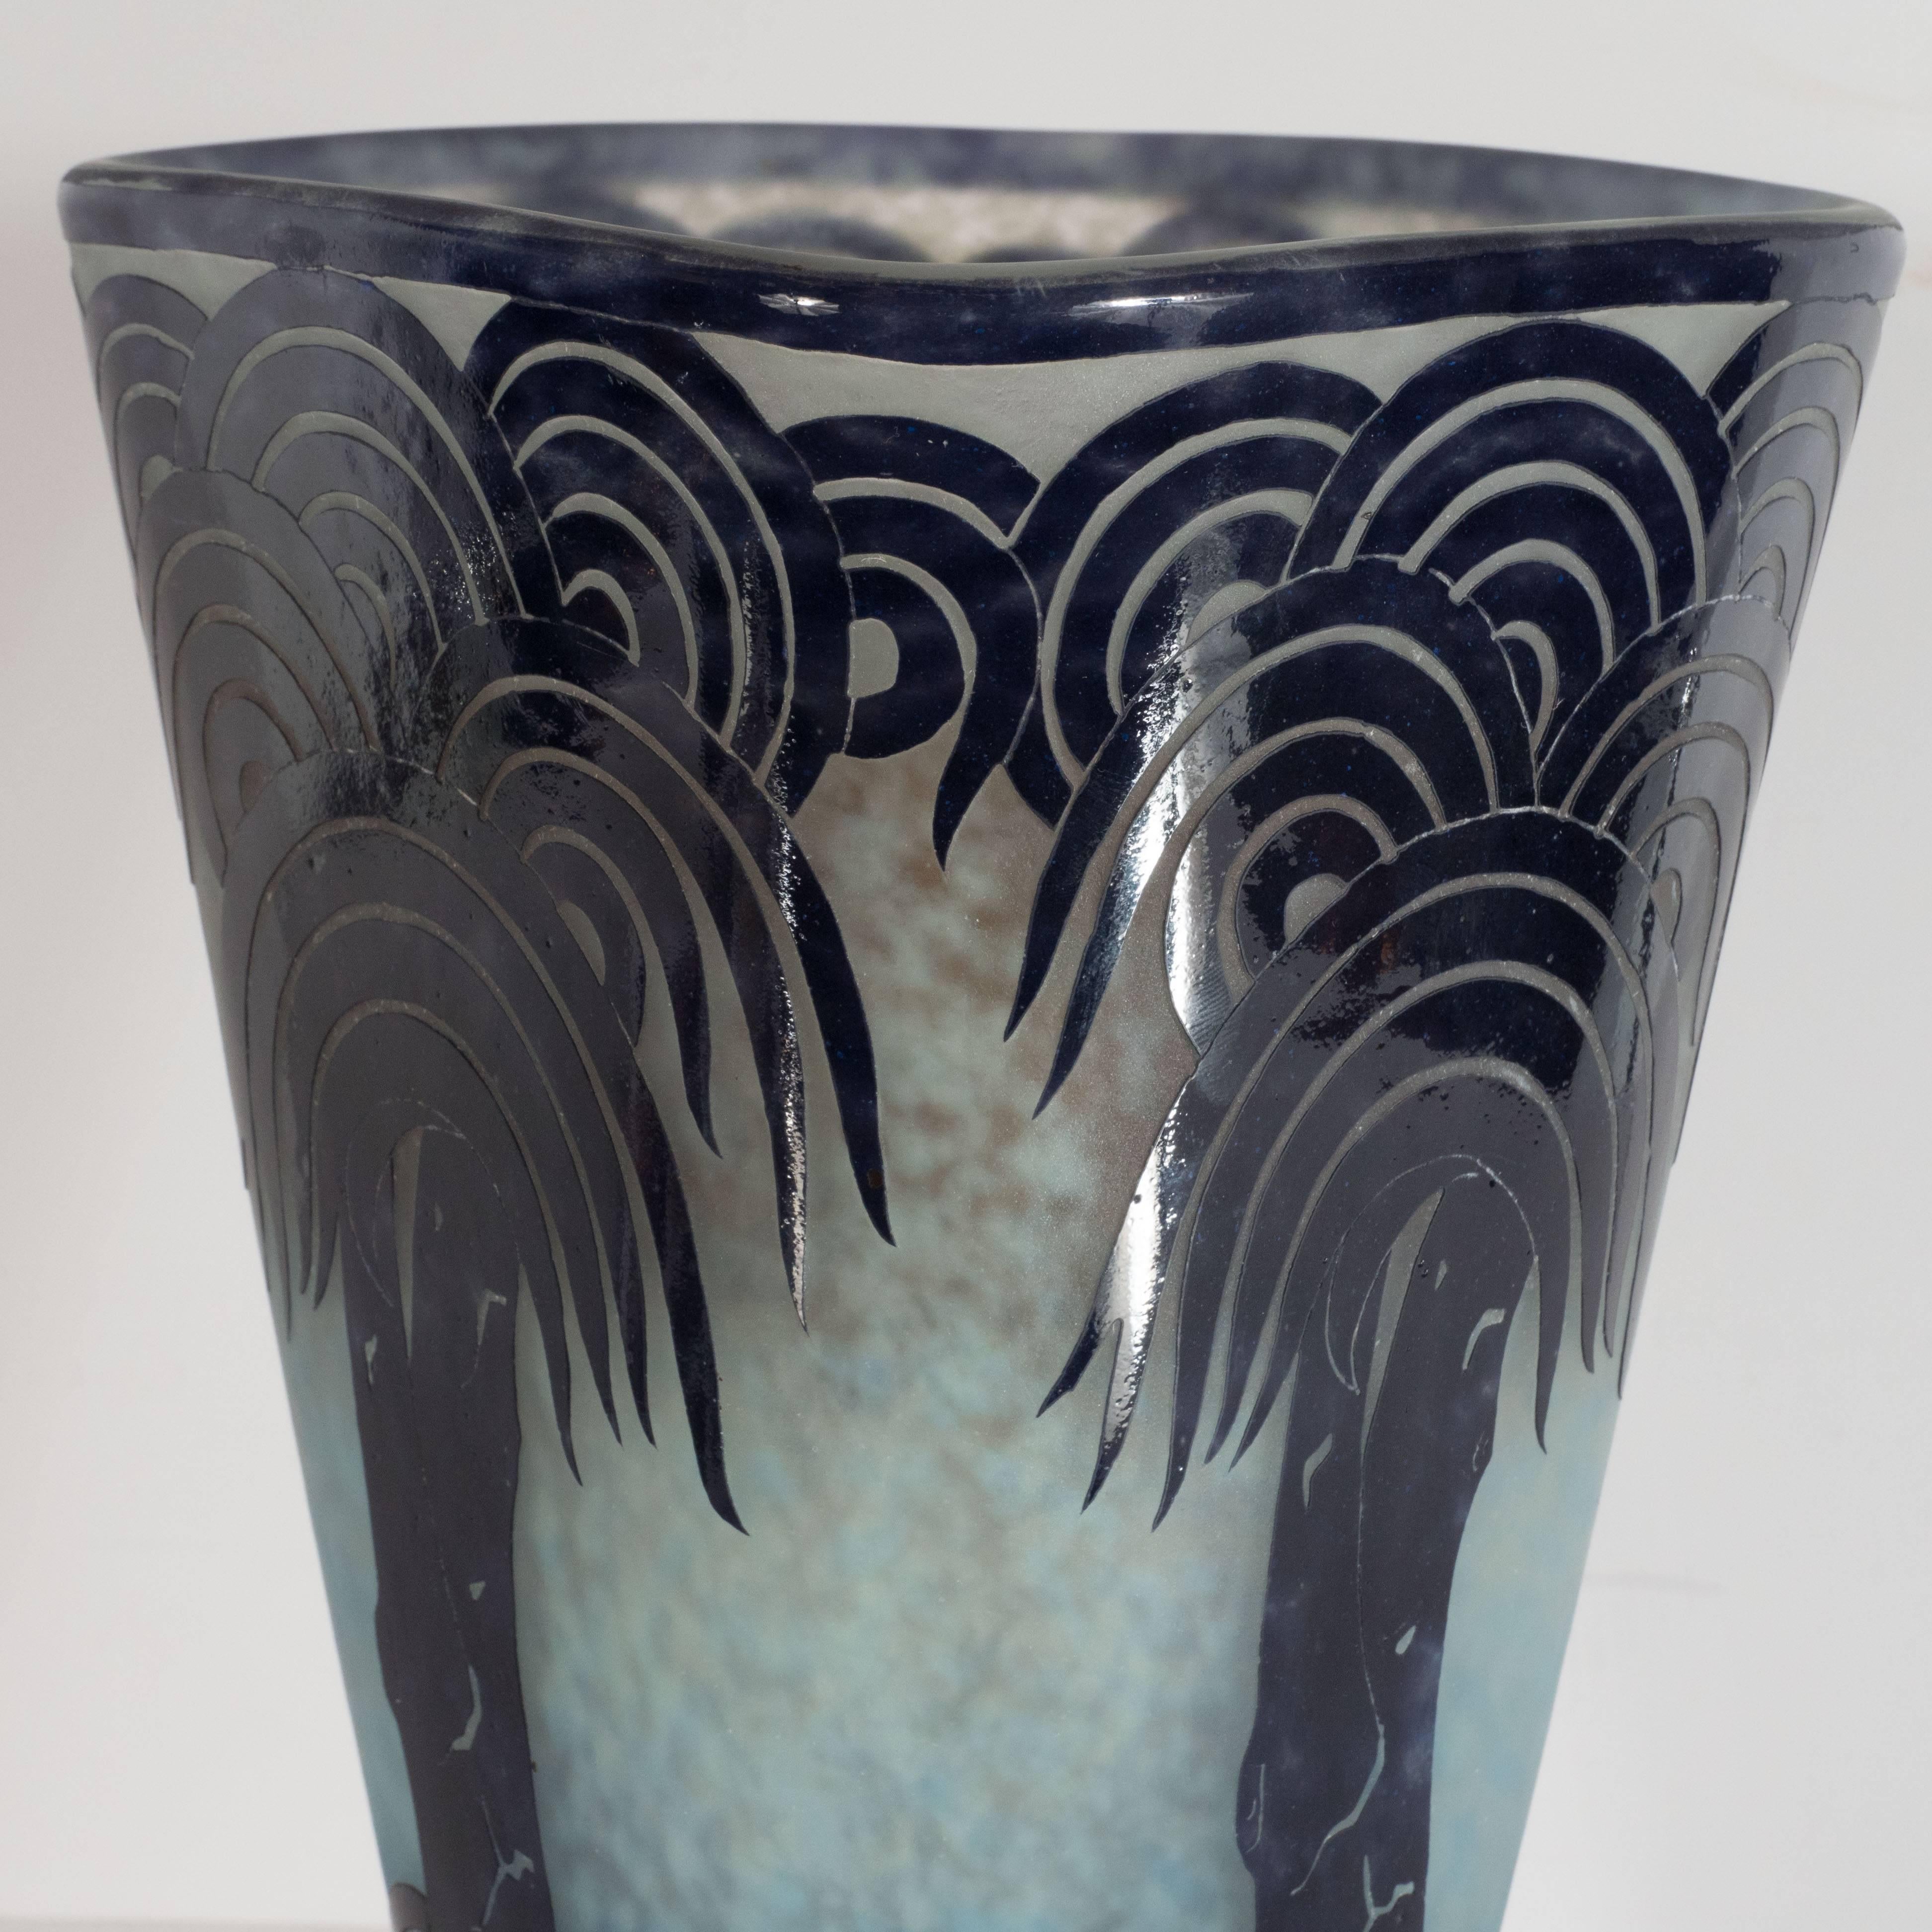 This rare cameo glass vase was realized by Charles Schneider- one of the most illustrious and influential glass blowers of the period in France, circa 1930. It is part of his celebrated 